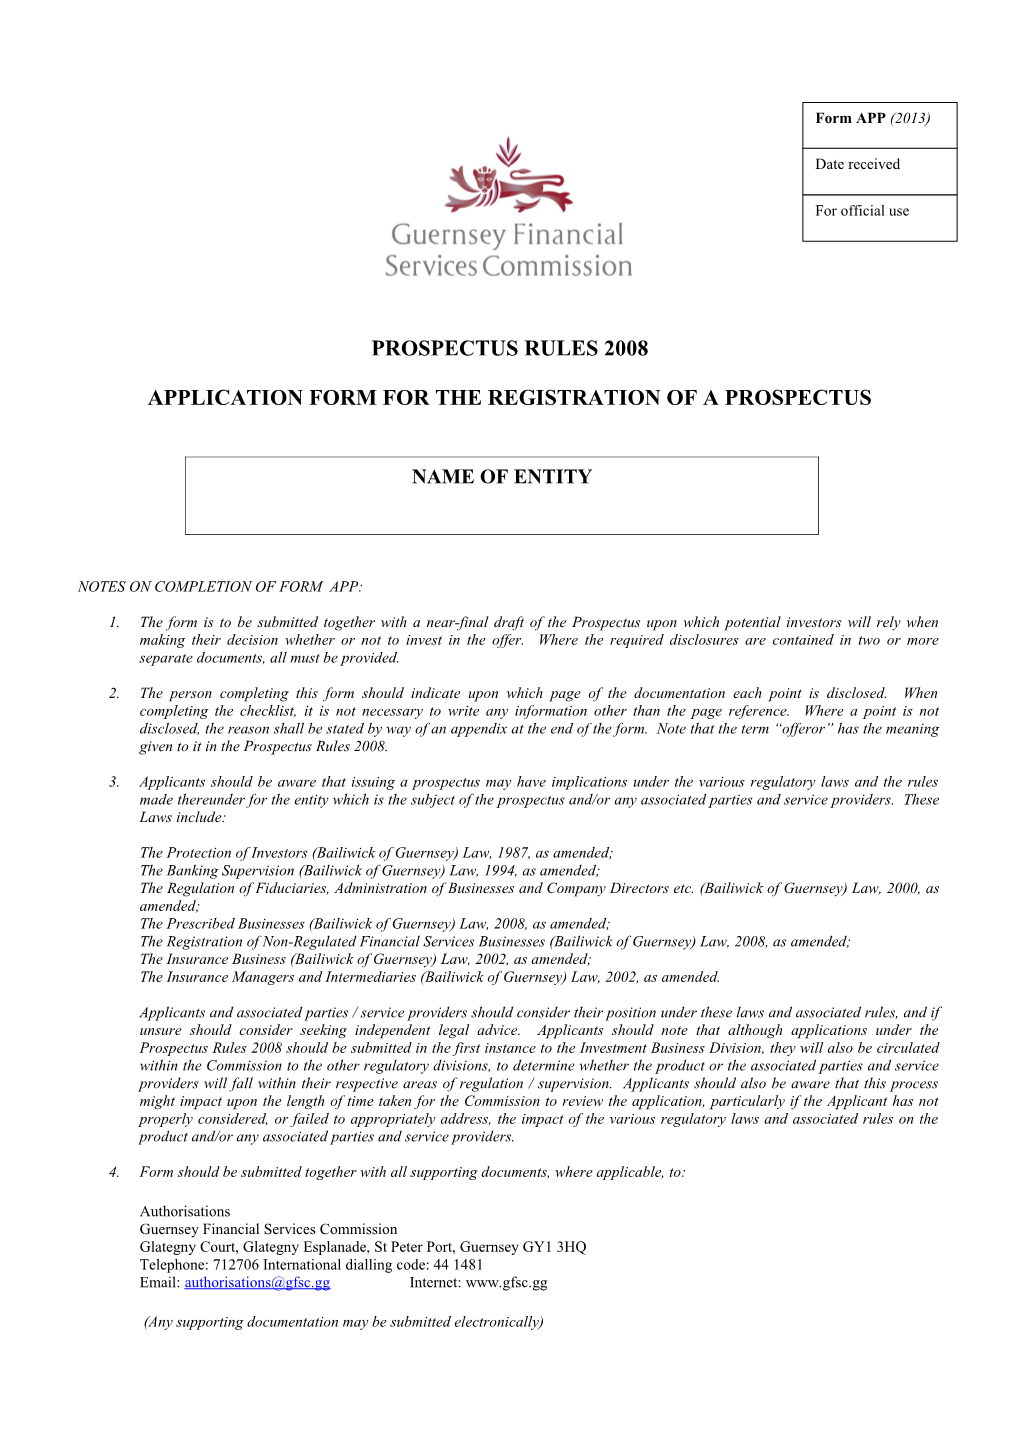 Application Form for the Registration of a Prospectus